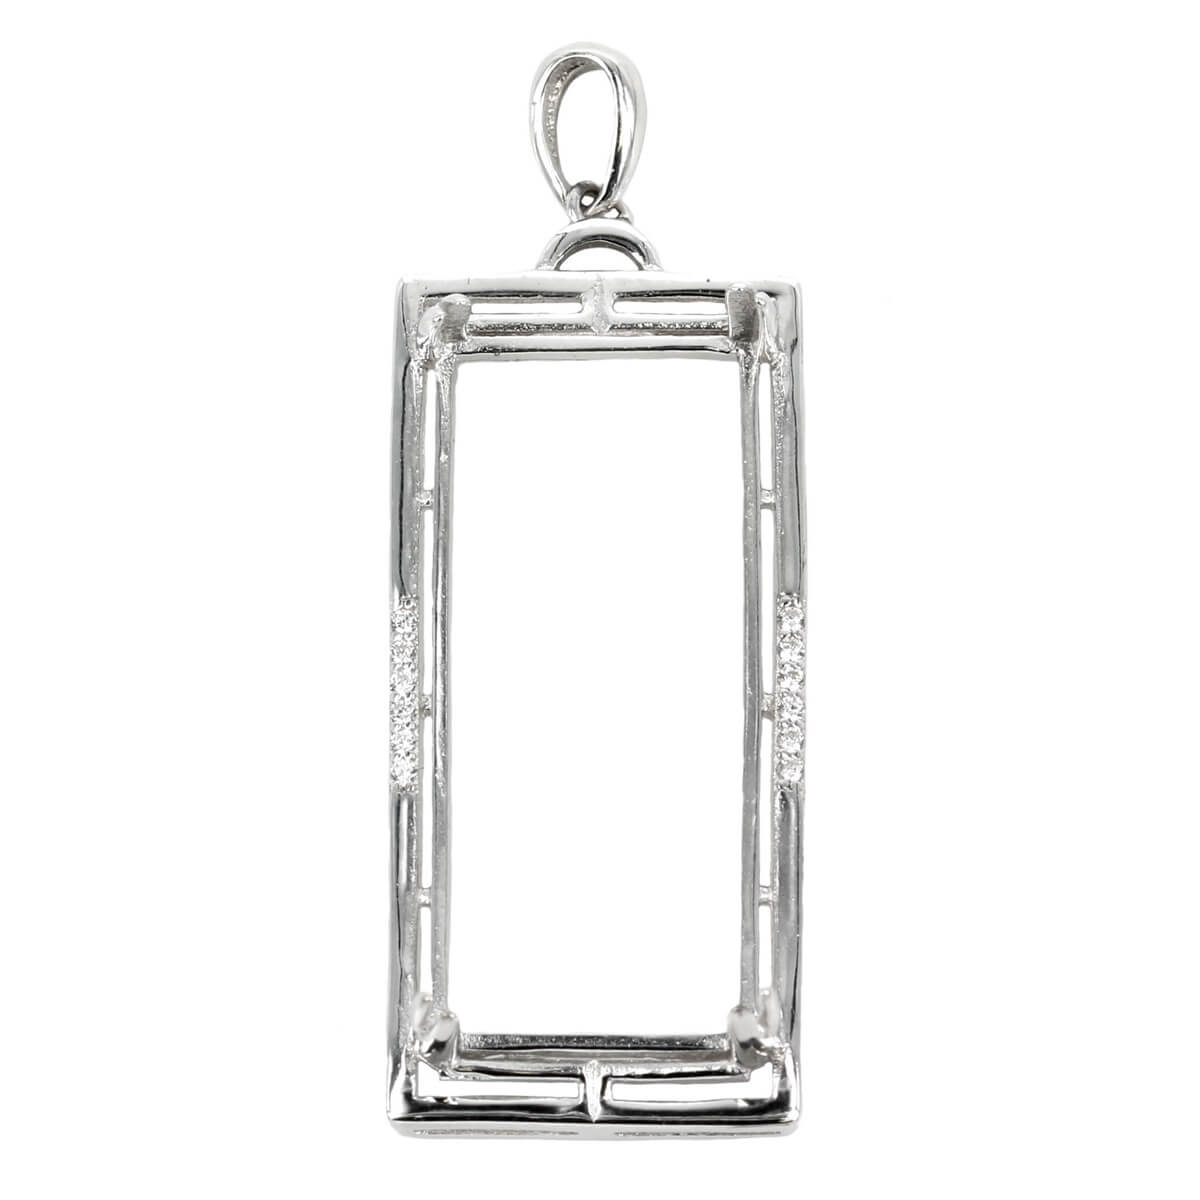 Rectangle Pendant with Cubic Zirconias-Set Sides and Soldered Loop and Bail in Sterling Silver 12x28mm 